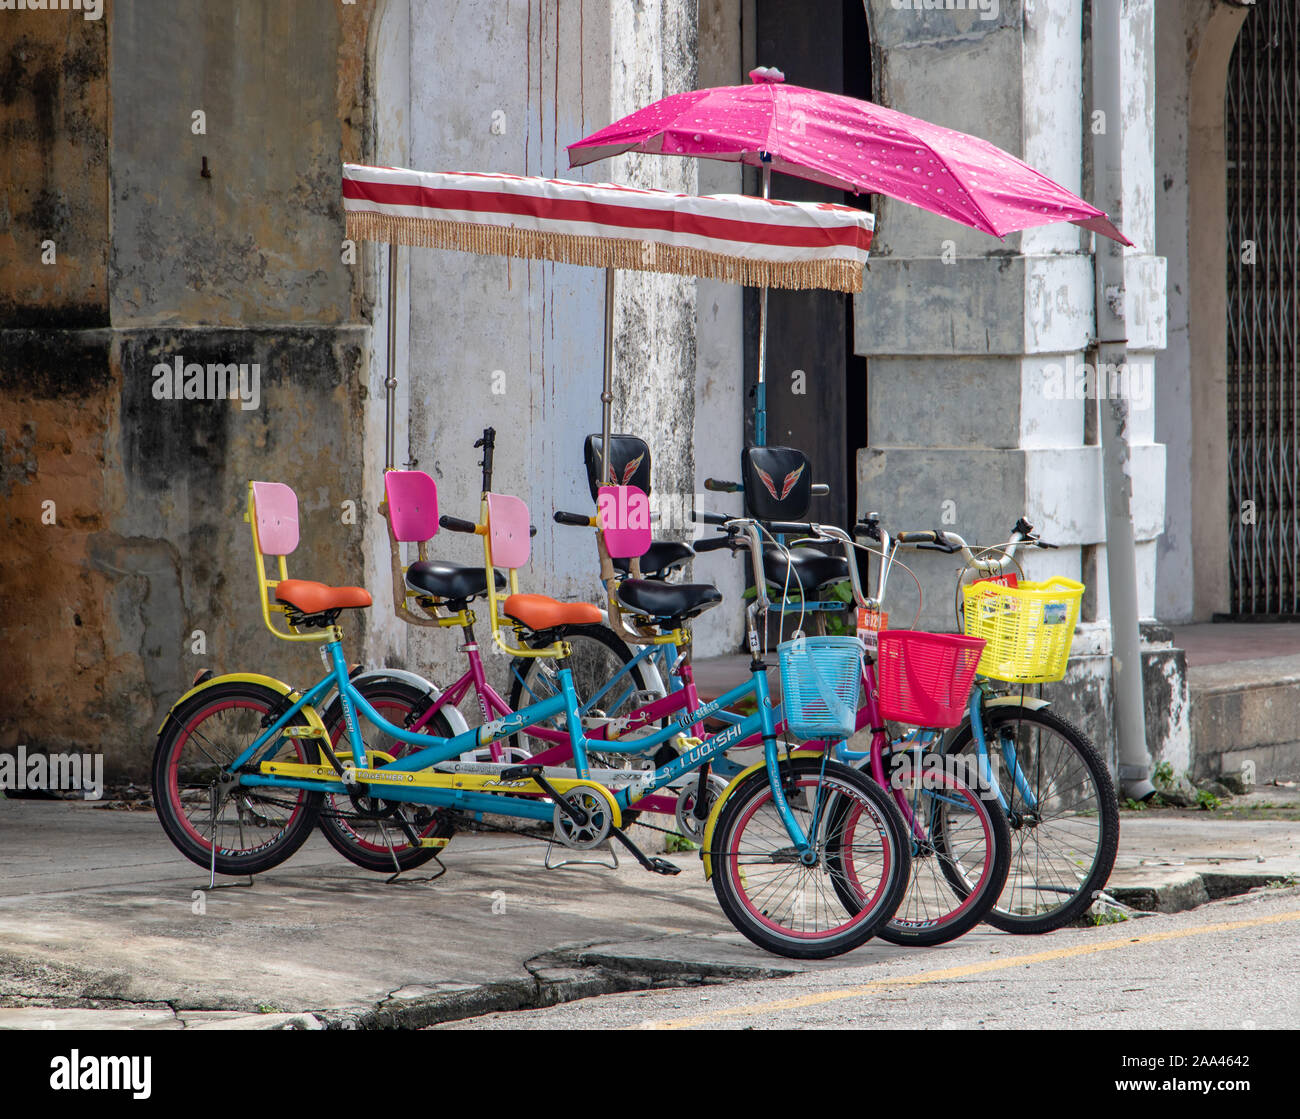 PENANG, MALAYSIA, NOV 12 2017, Colorful bicycles with umbrellas for tourists parked on the city street. Stock Photo